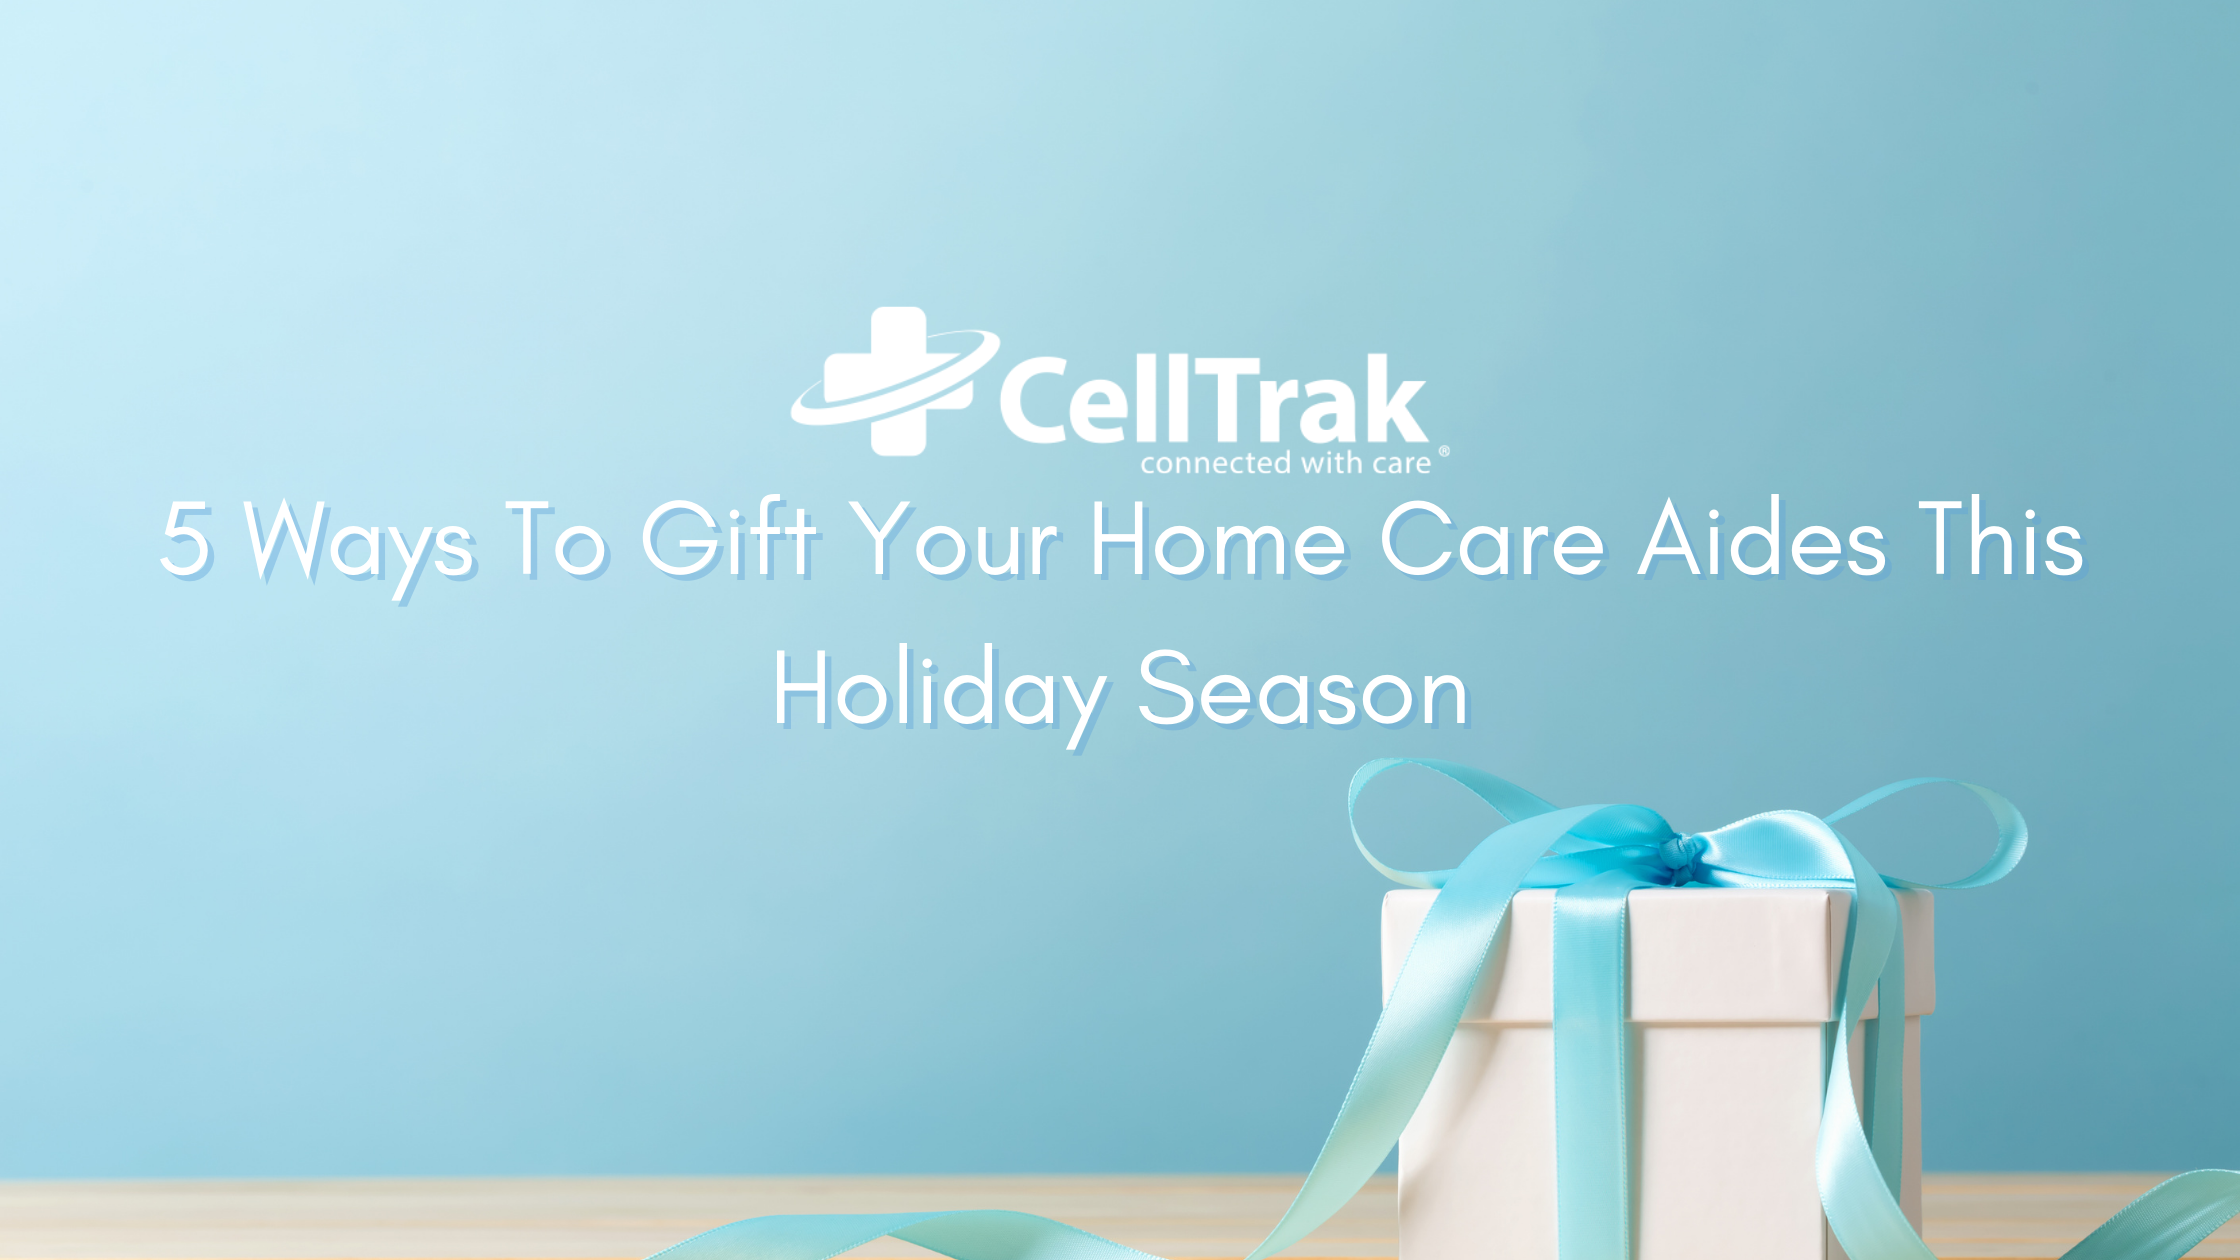 5 Ways to Gift Your Home Care Aides This Holiday Season